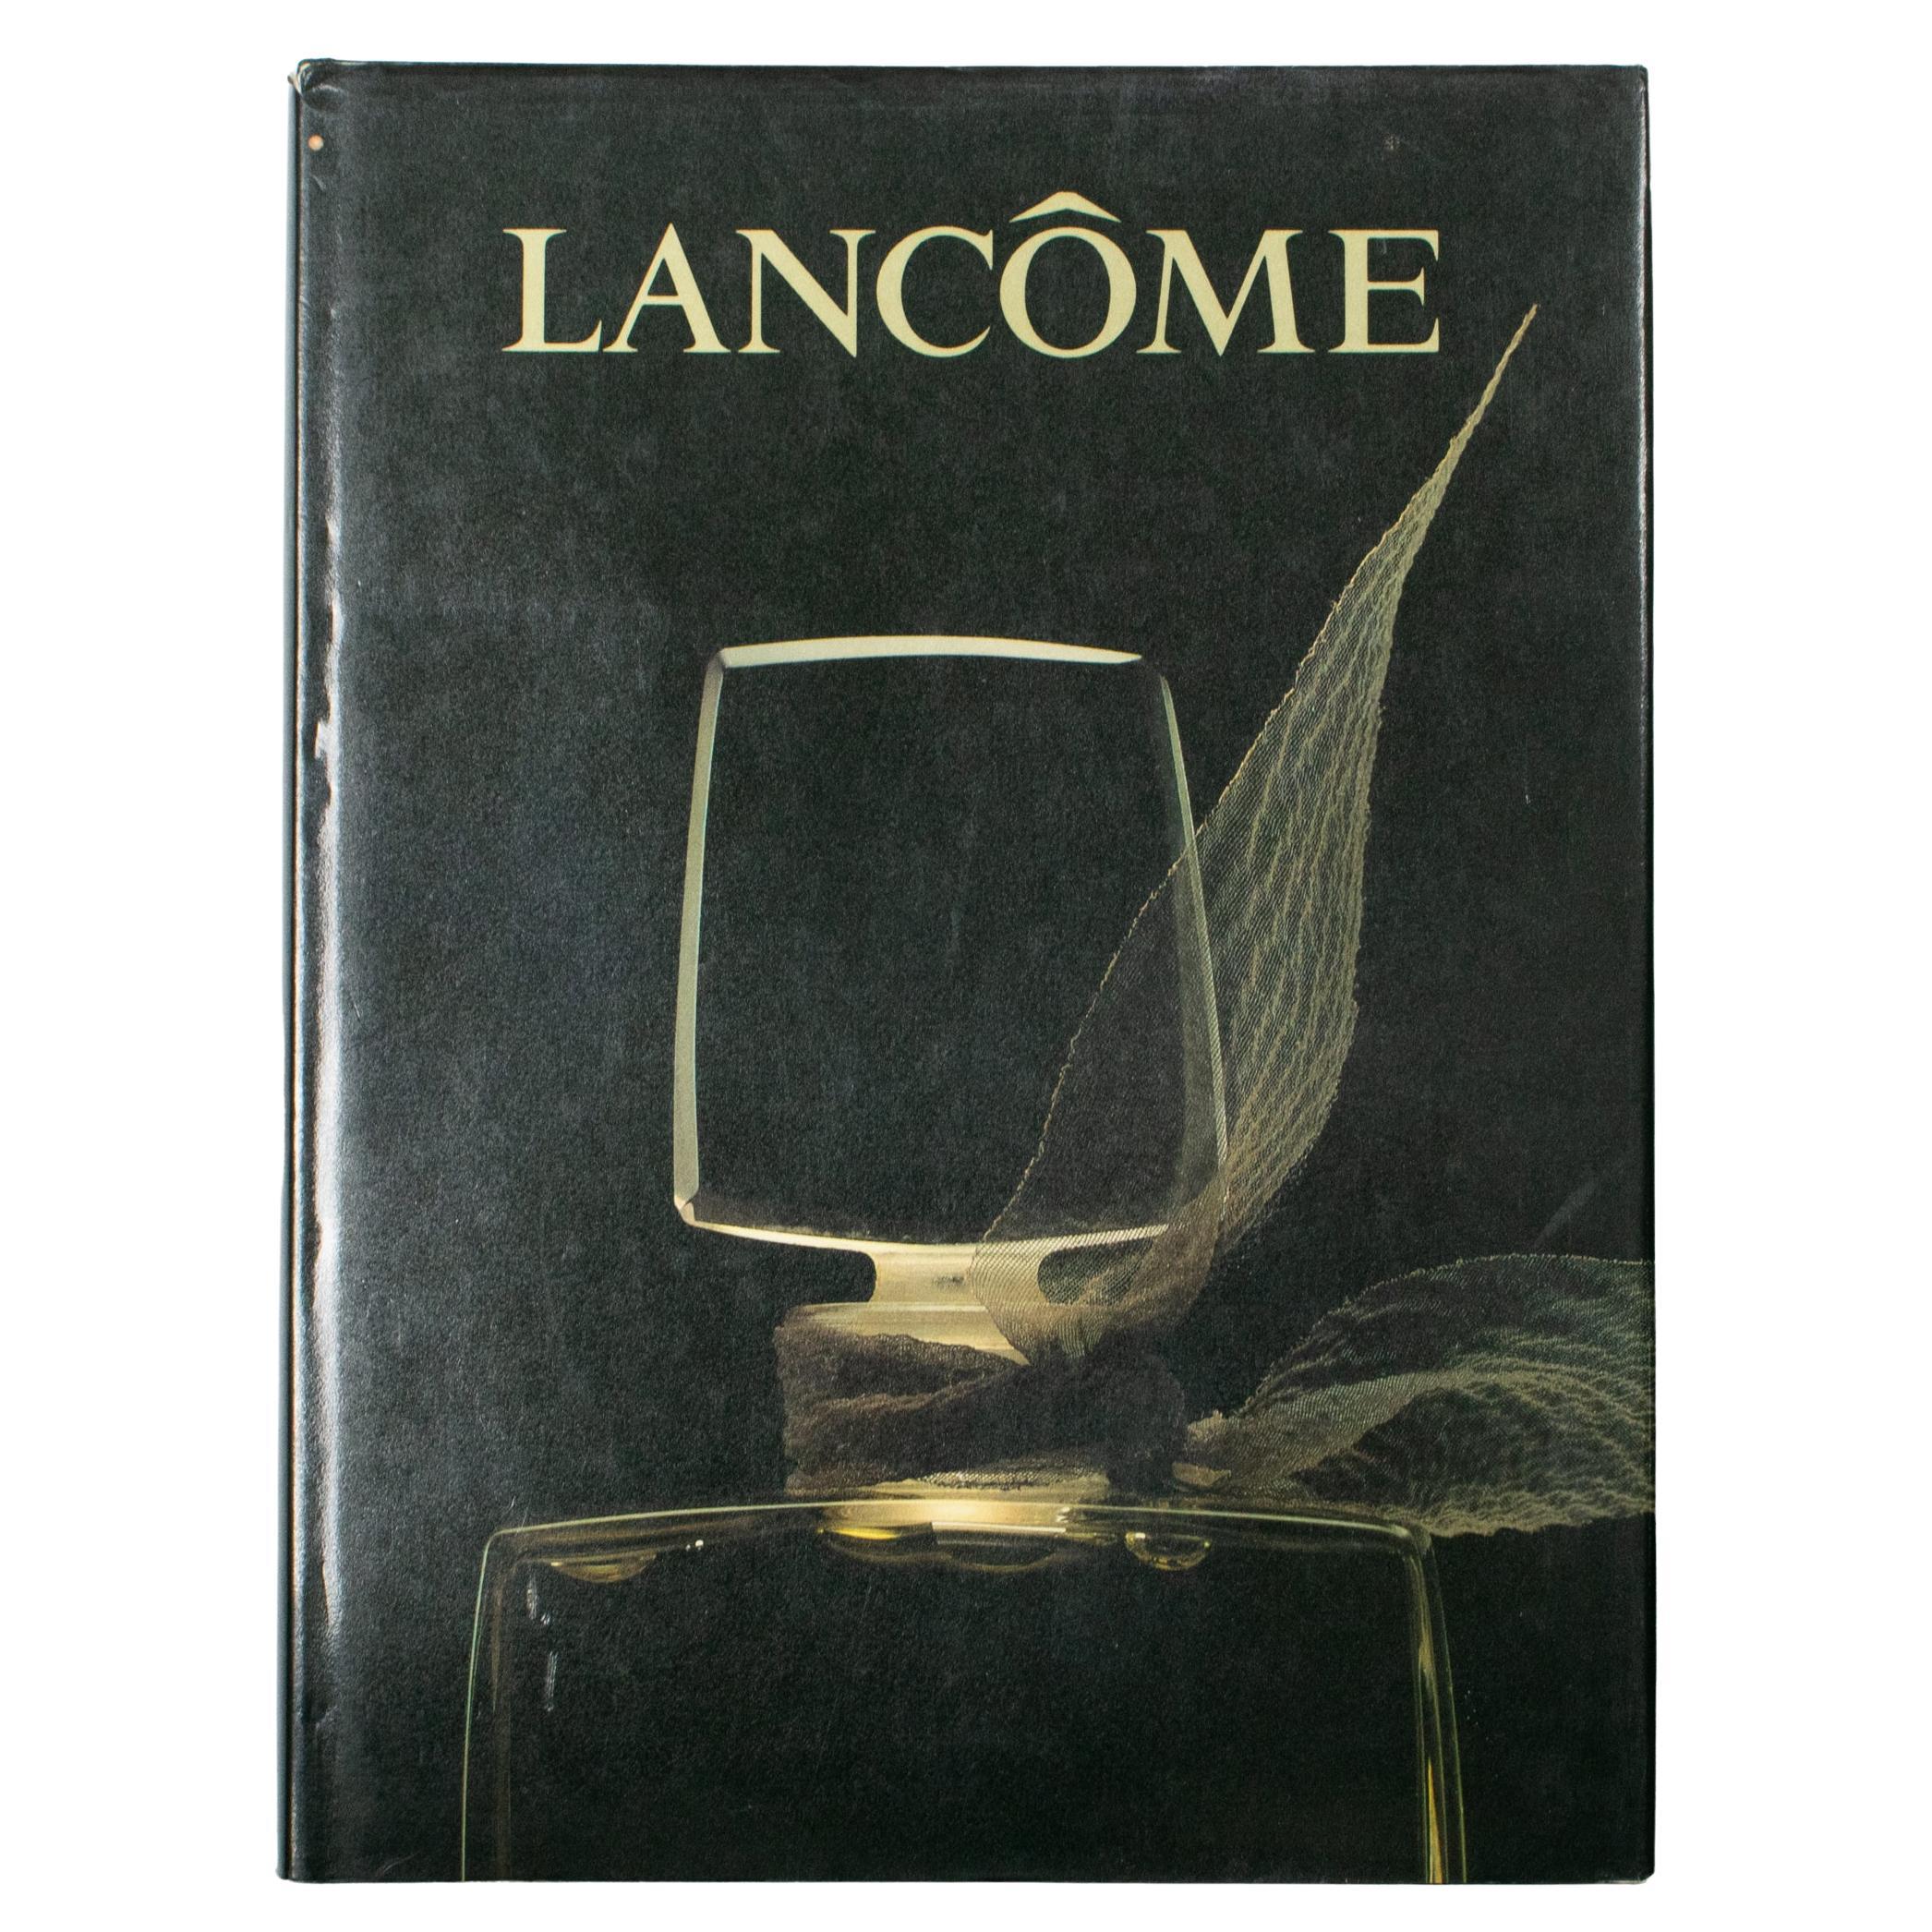 Lancome, French Book by Jacqueline Demornex, 1985